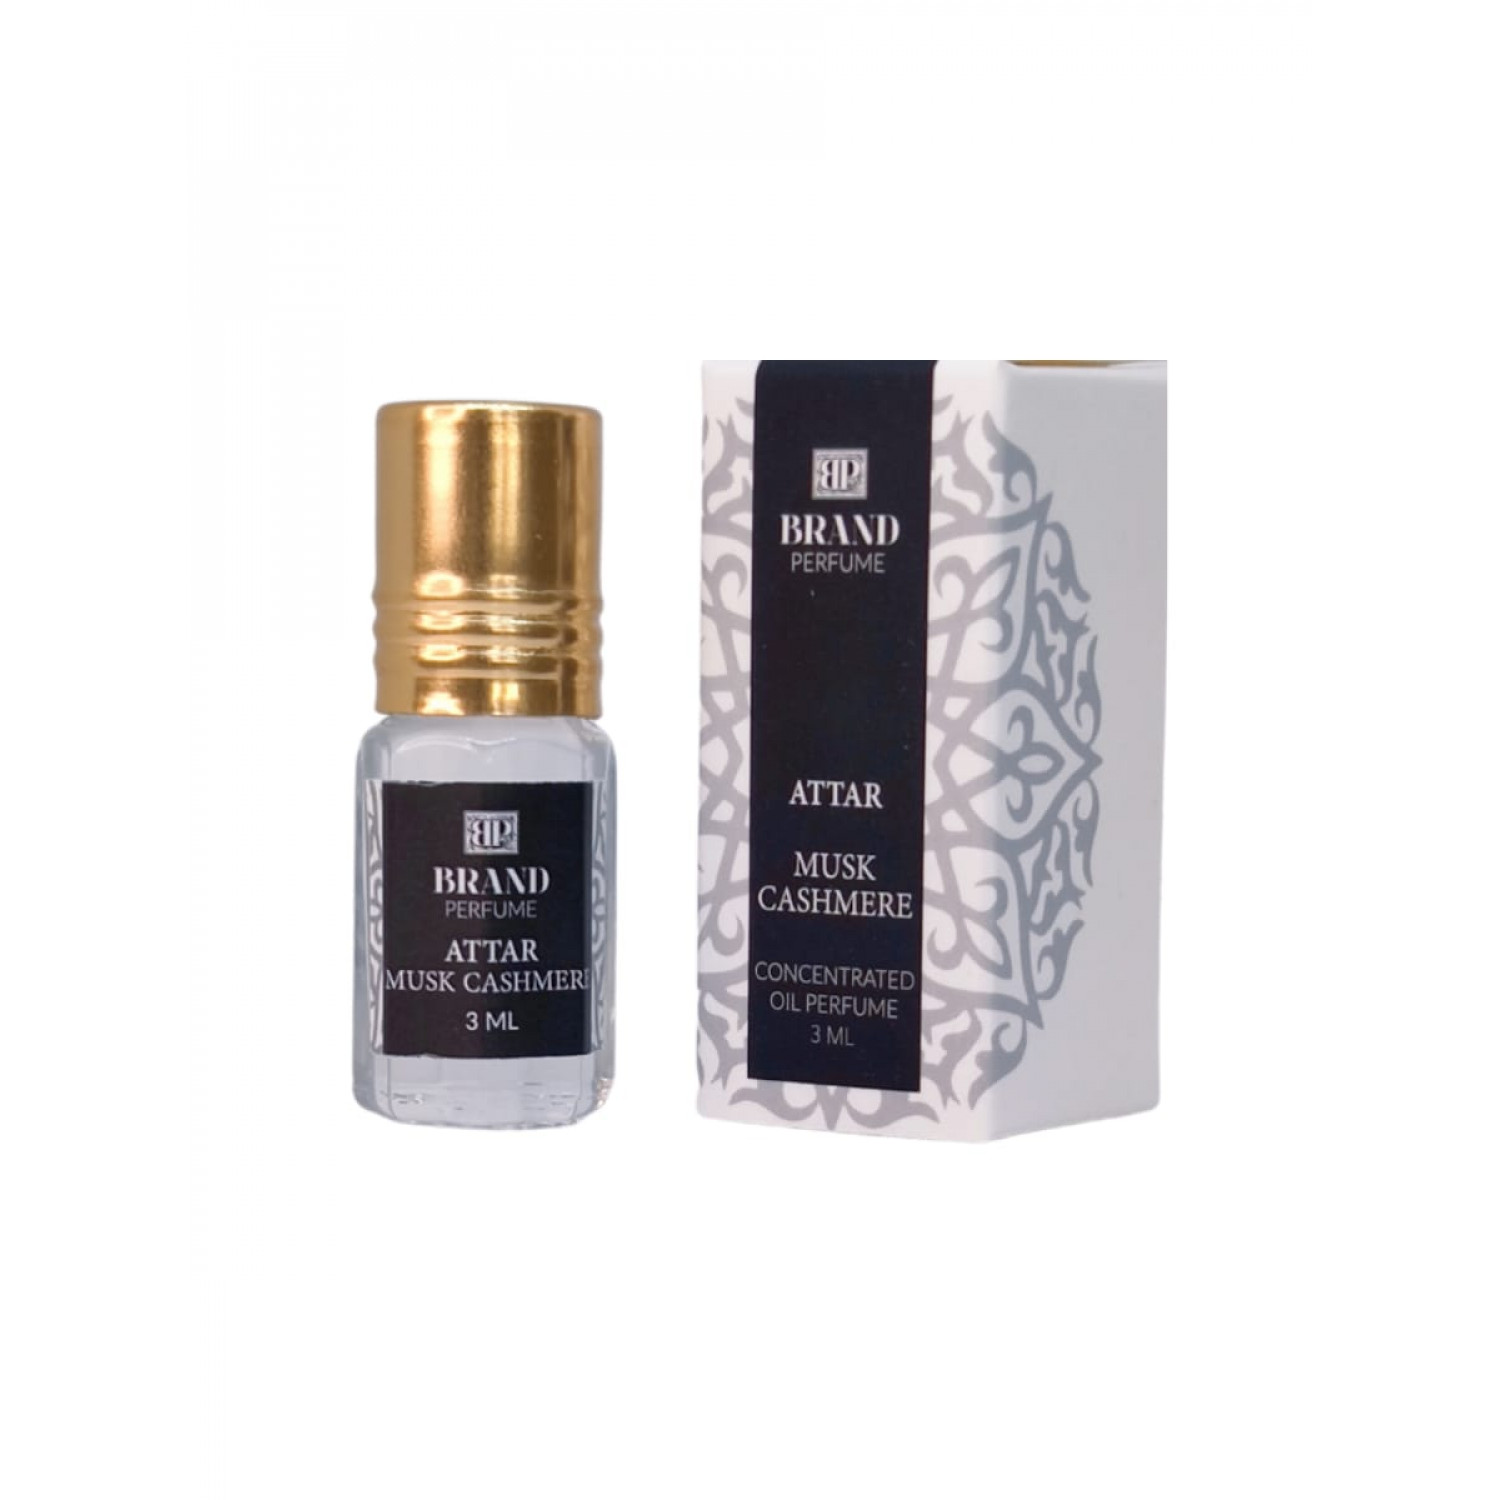 ATTAR MUSK CASHMERE Concentrated Oil Perfume, Brand Perfume (Концентрированные масляные духи), ролик, 3 мл.